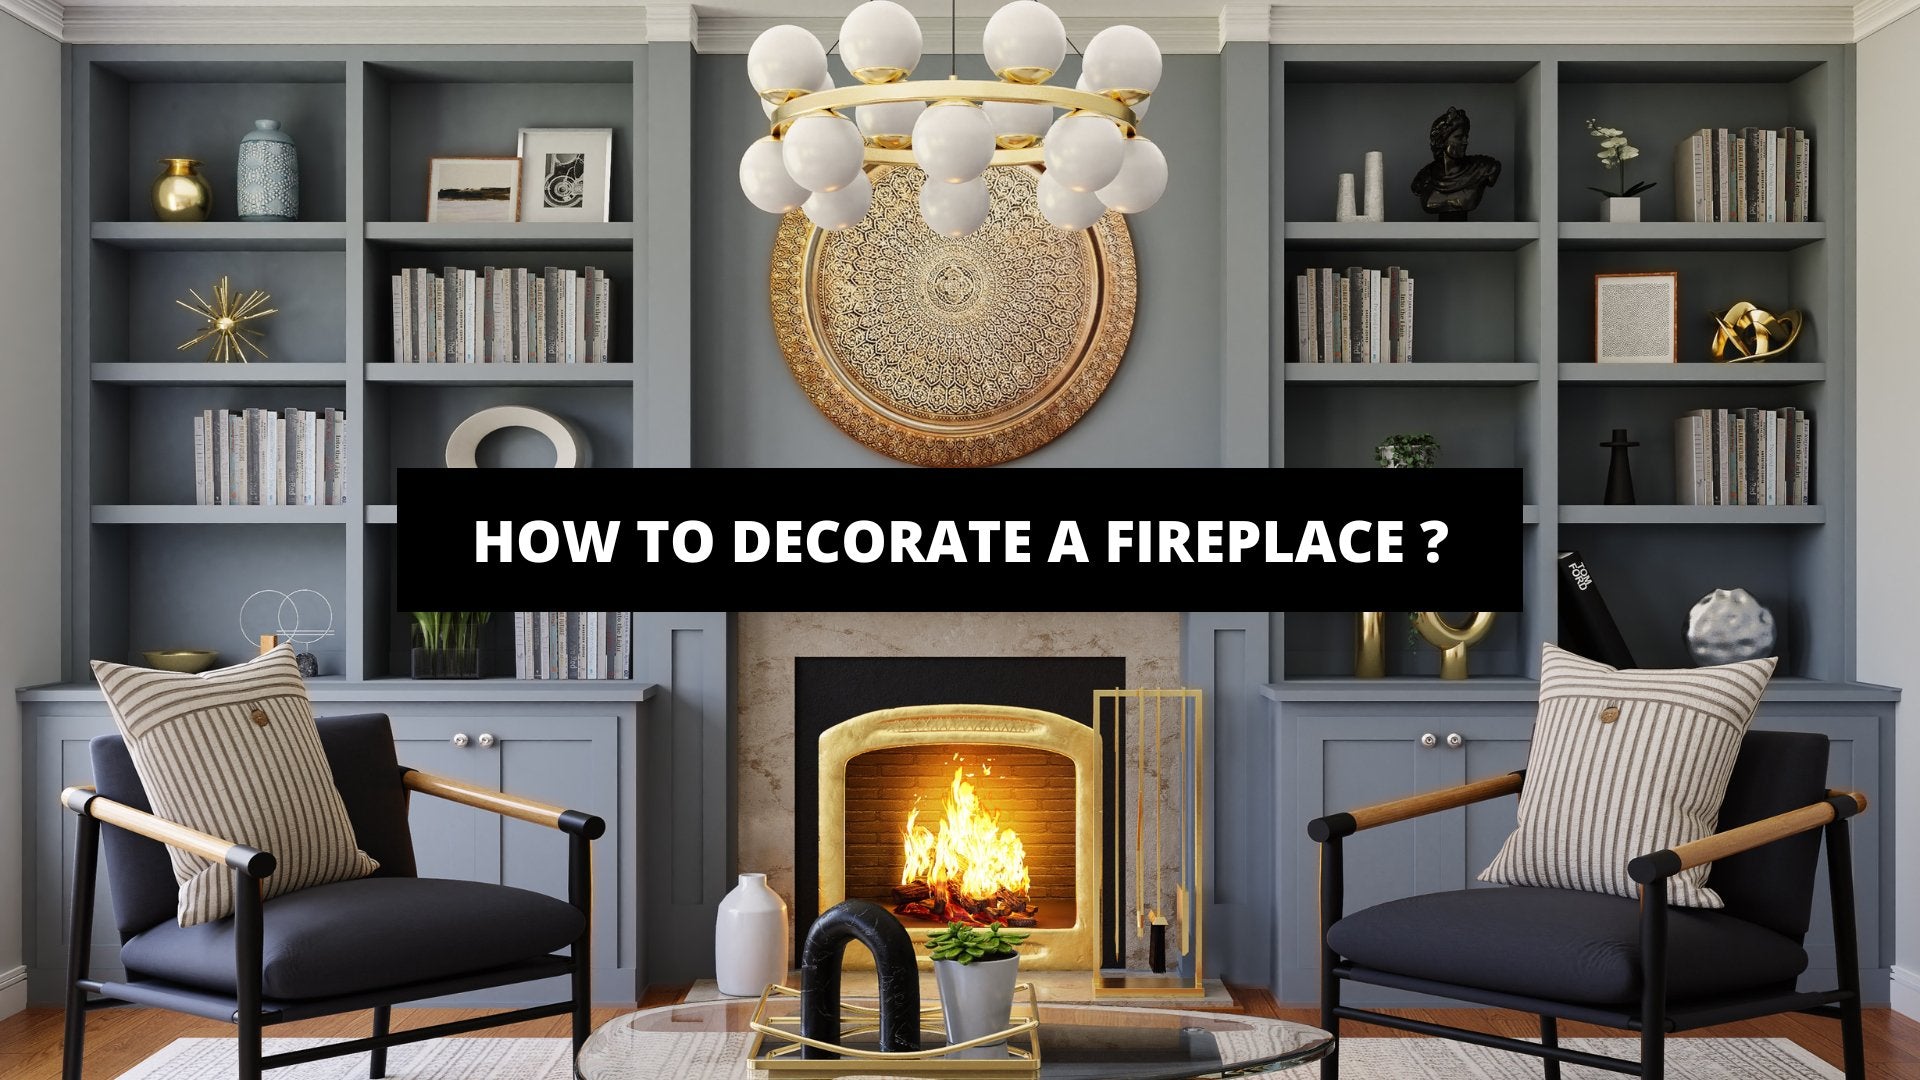 How To Decorate A Fireplace ? - The Trendy Art